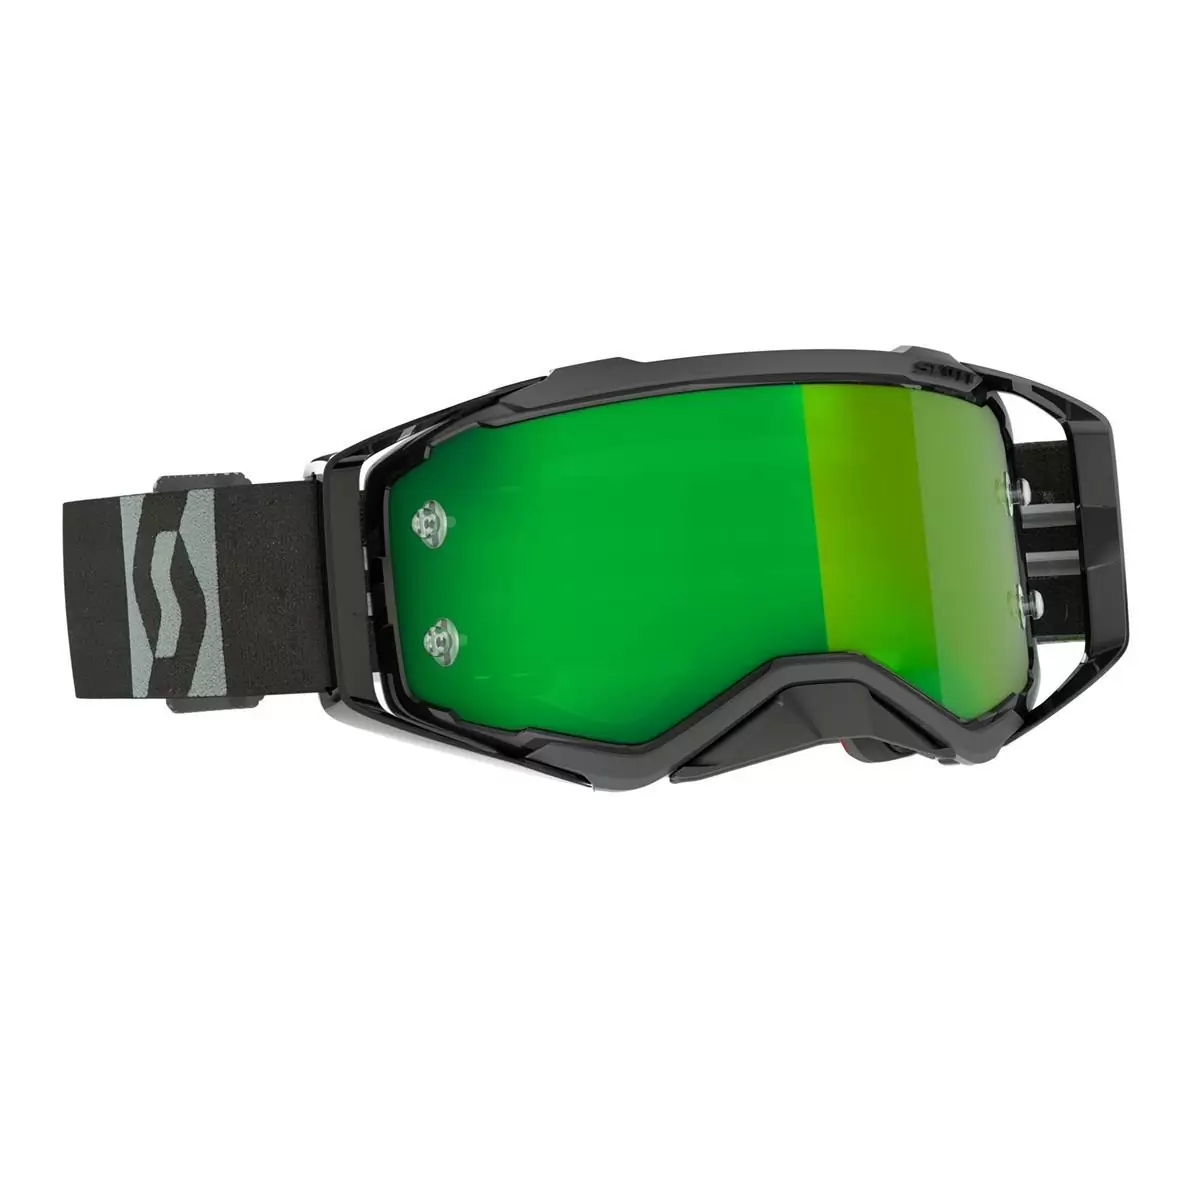 Prospect Mask Camo Grey/Black With Chrome Works Green Lens - image